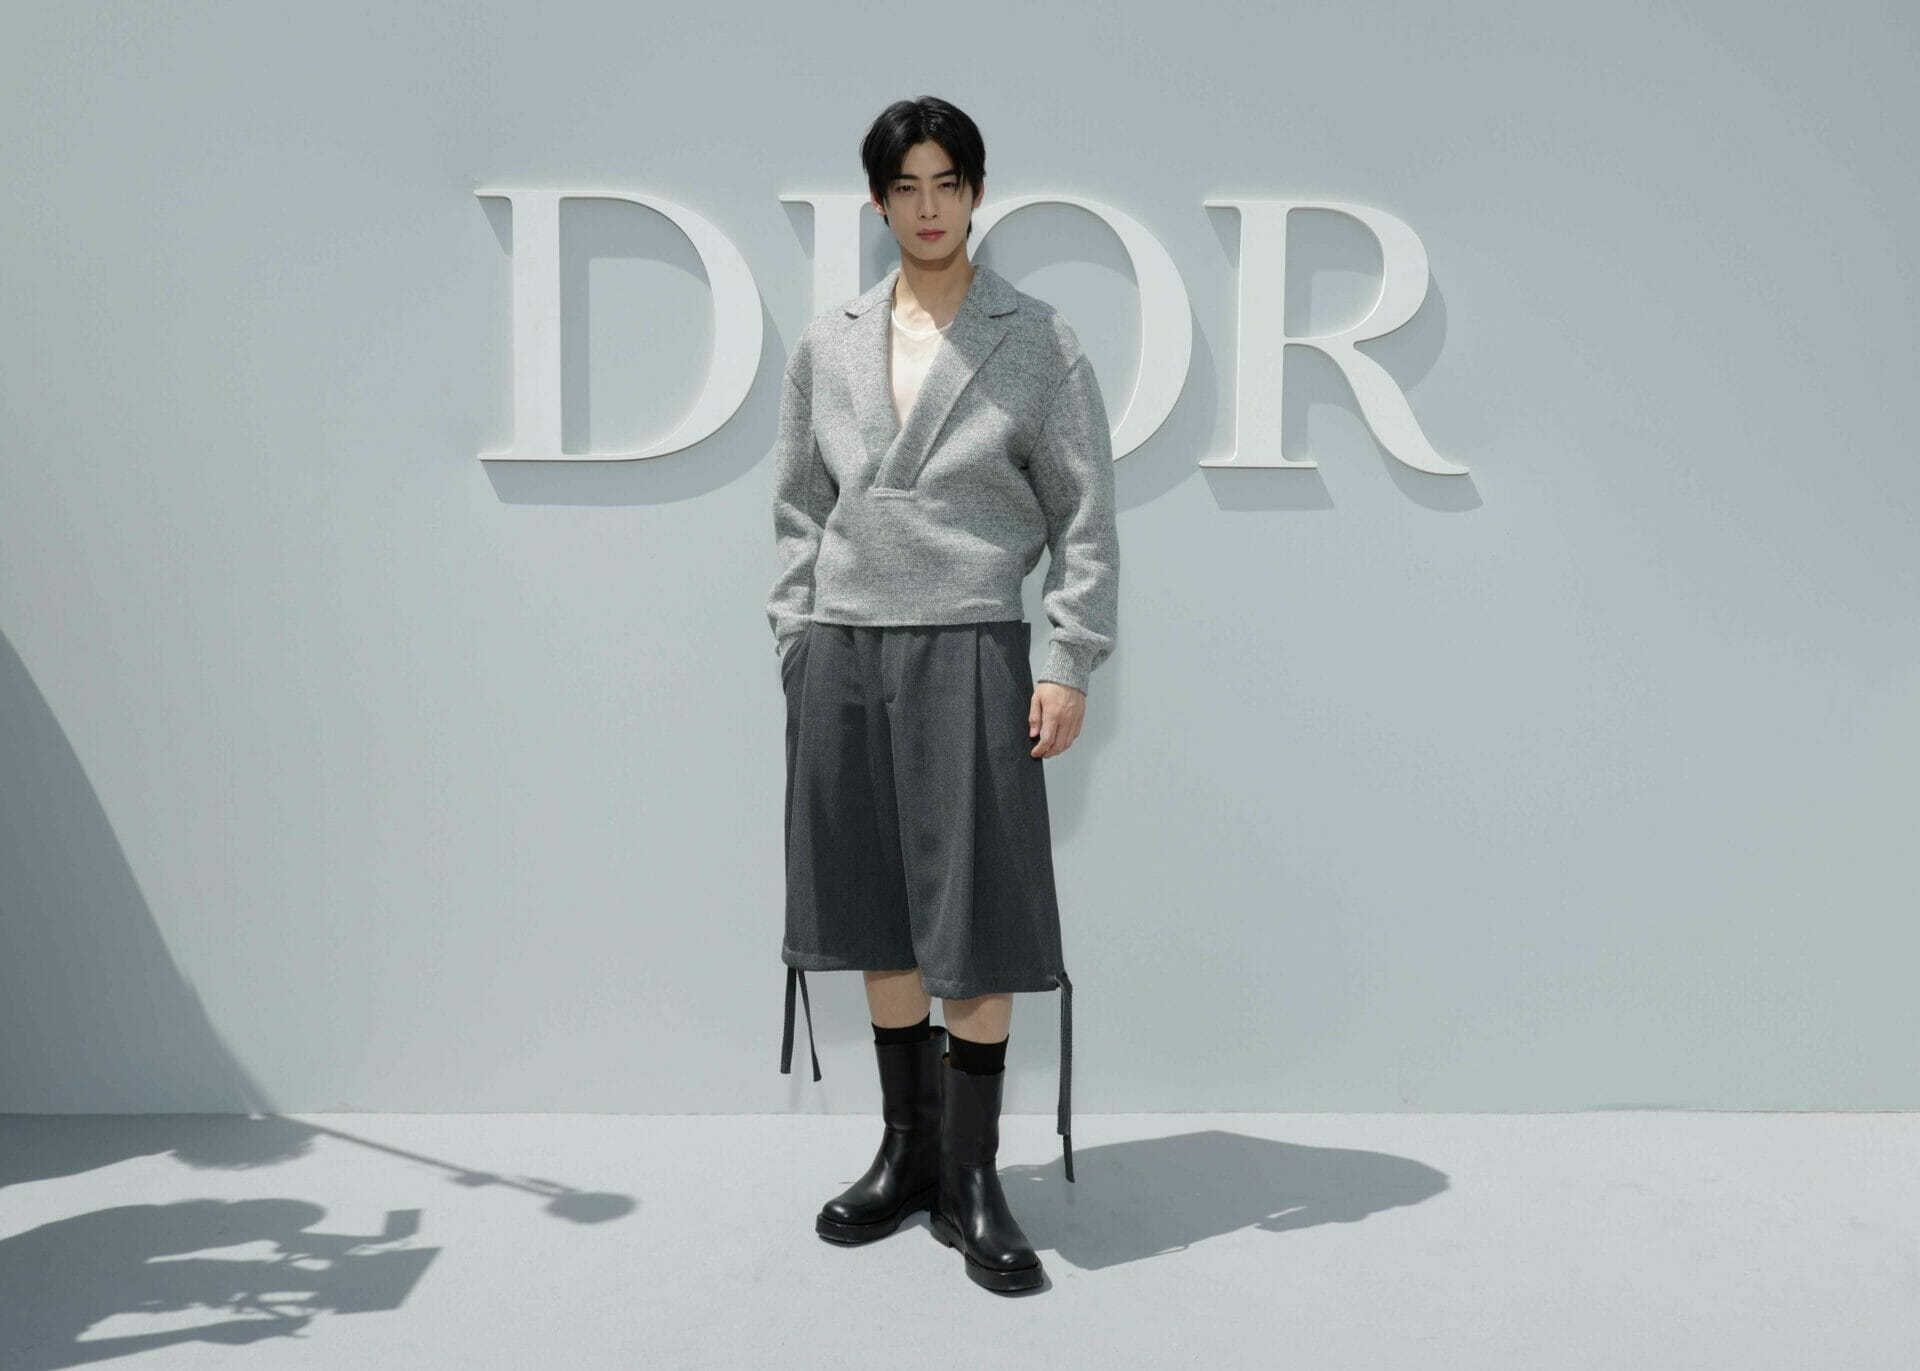 Eunwoo Cha - Everything you need to know about the Dior Men's Spring/Summer 2023 Show.